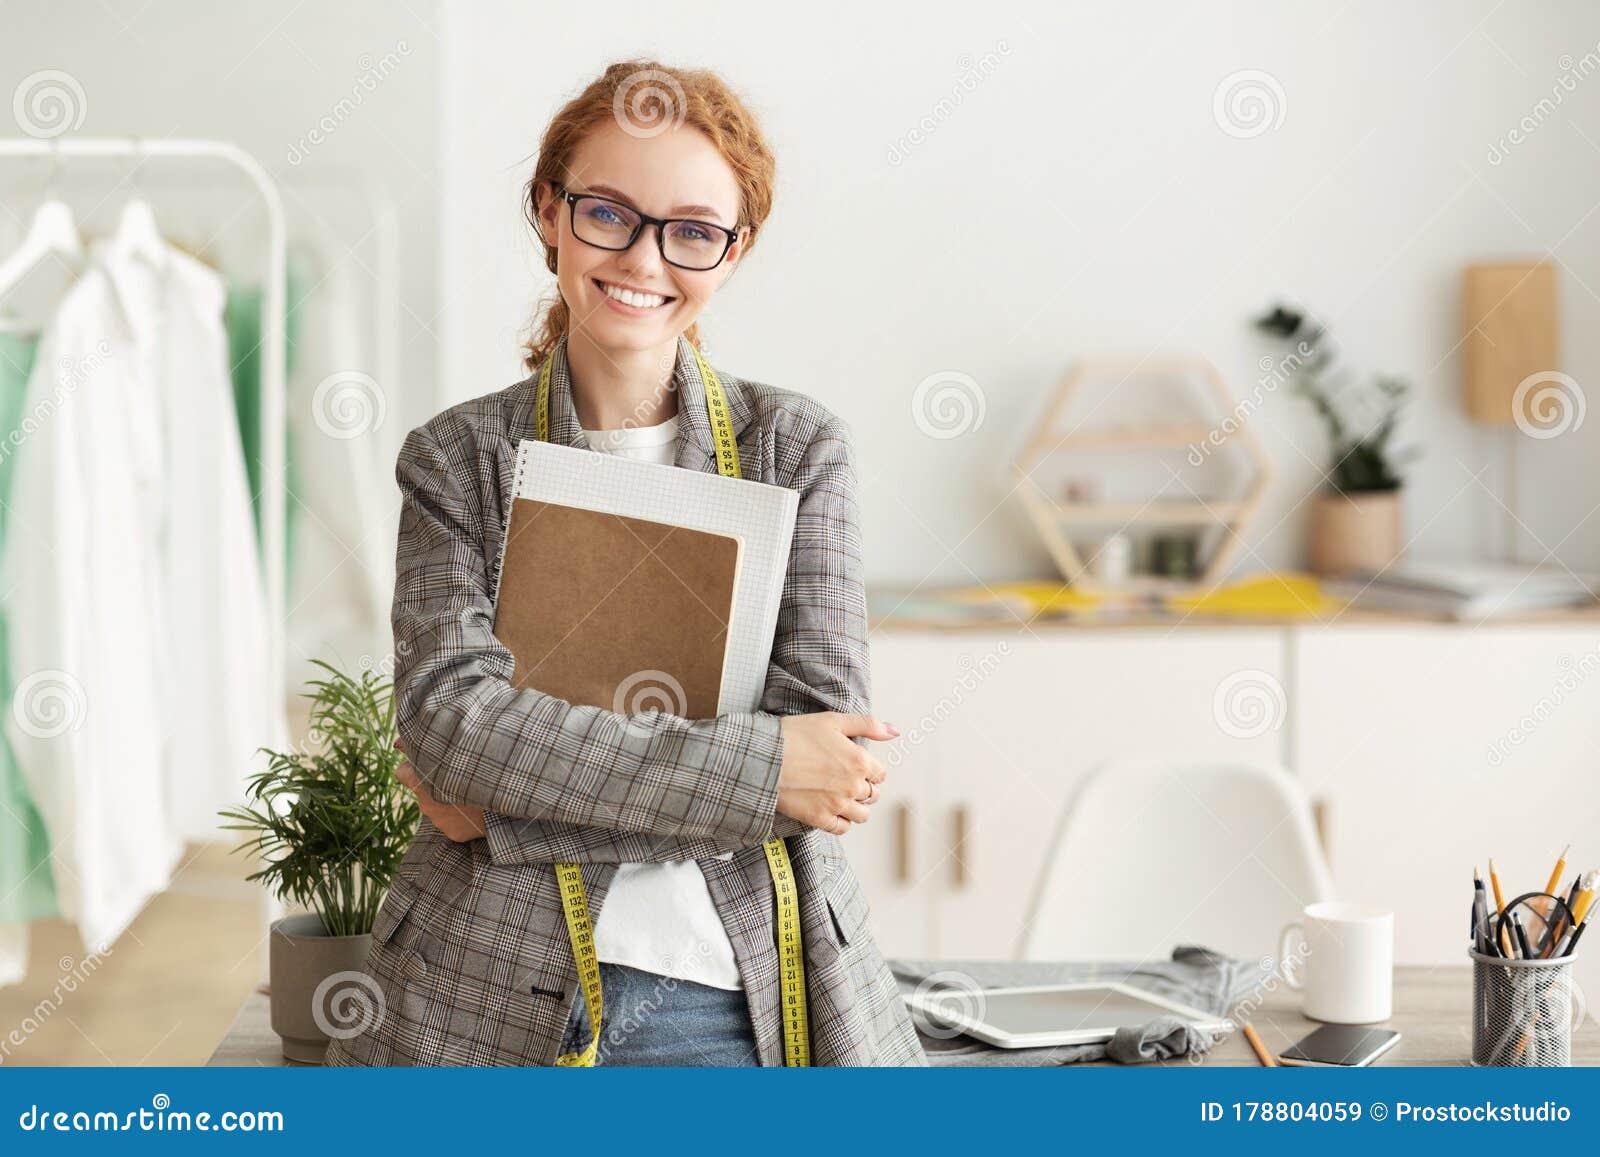 Young Clothing Designer in Her Own Fashion Studio Stock Image - Image ...